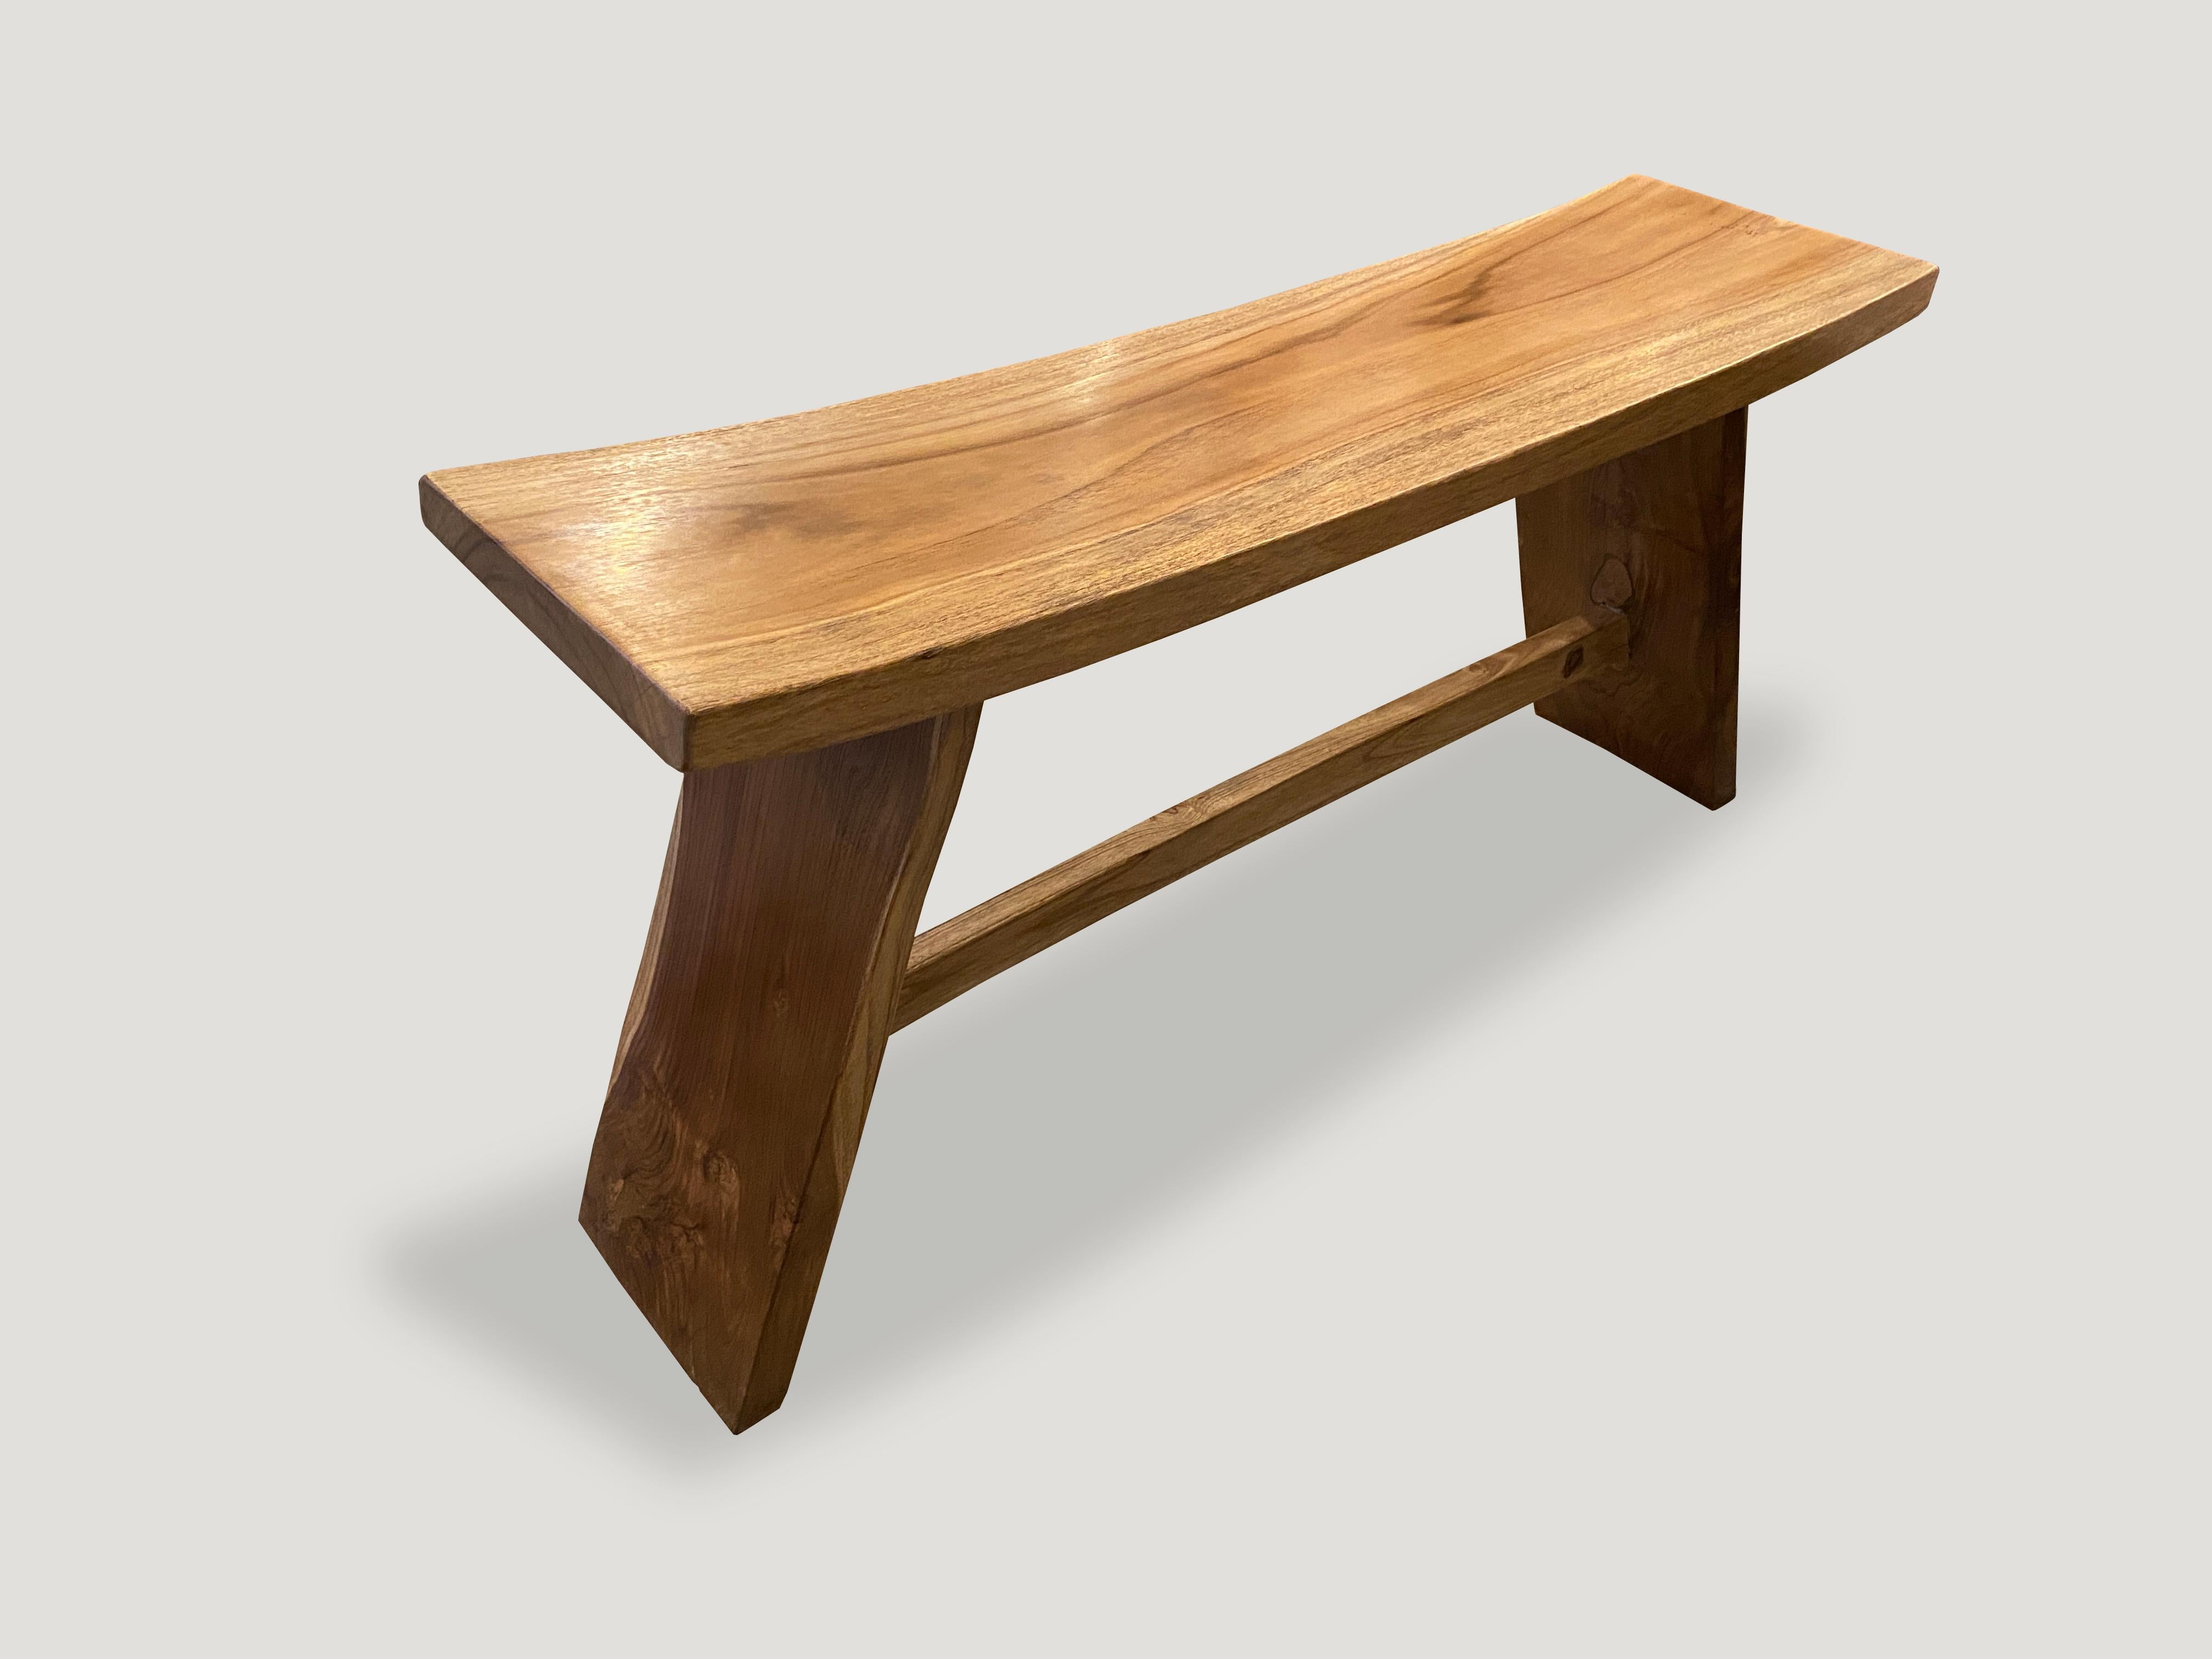 Reclaimed teak wood bench with a smooth, natural oil finish. The top is made from a solid teak slab. Custom stains available. Please inquire.

Own an Andrianna Shamaris original.

Andrianna Shamaris. The Leader In Modern Organic Design.